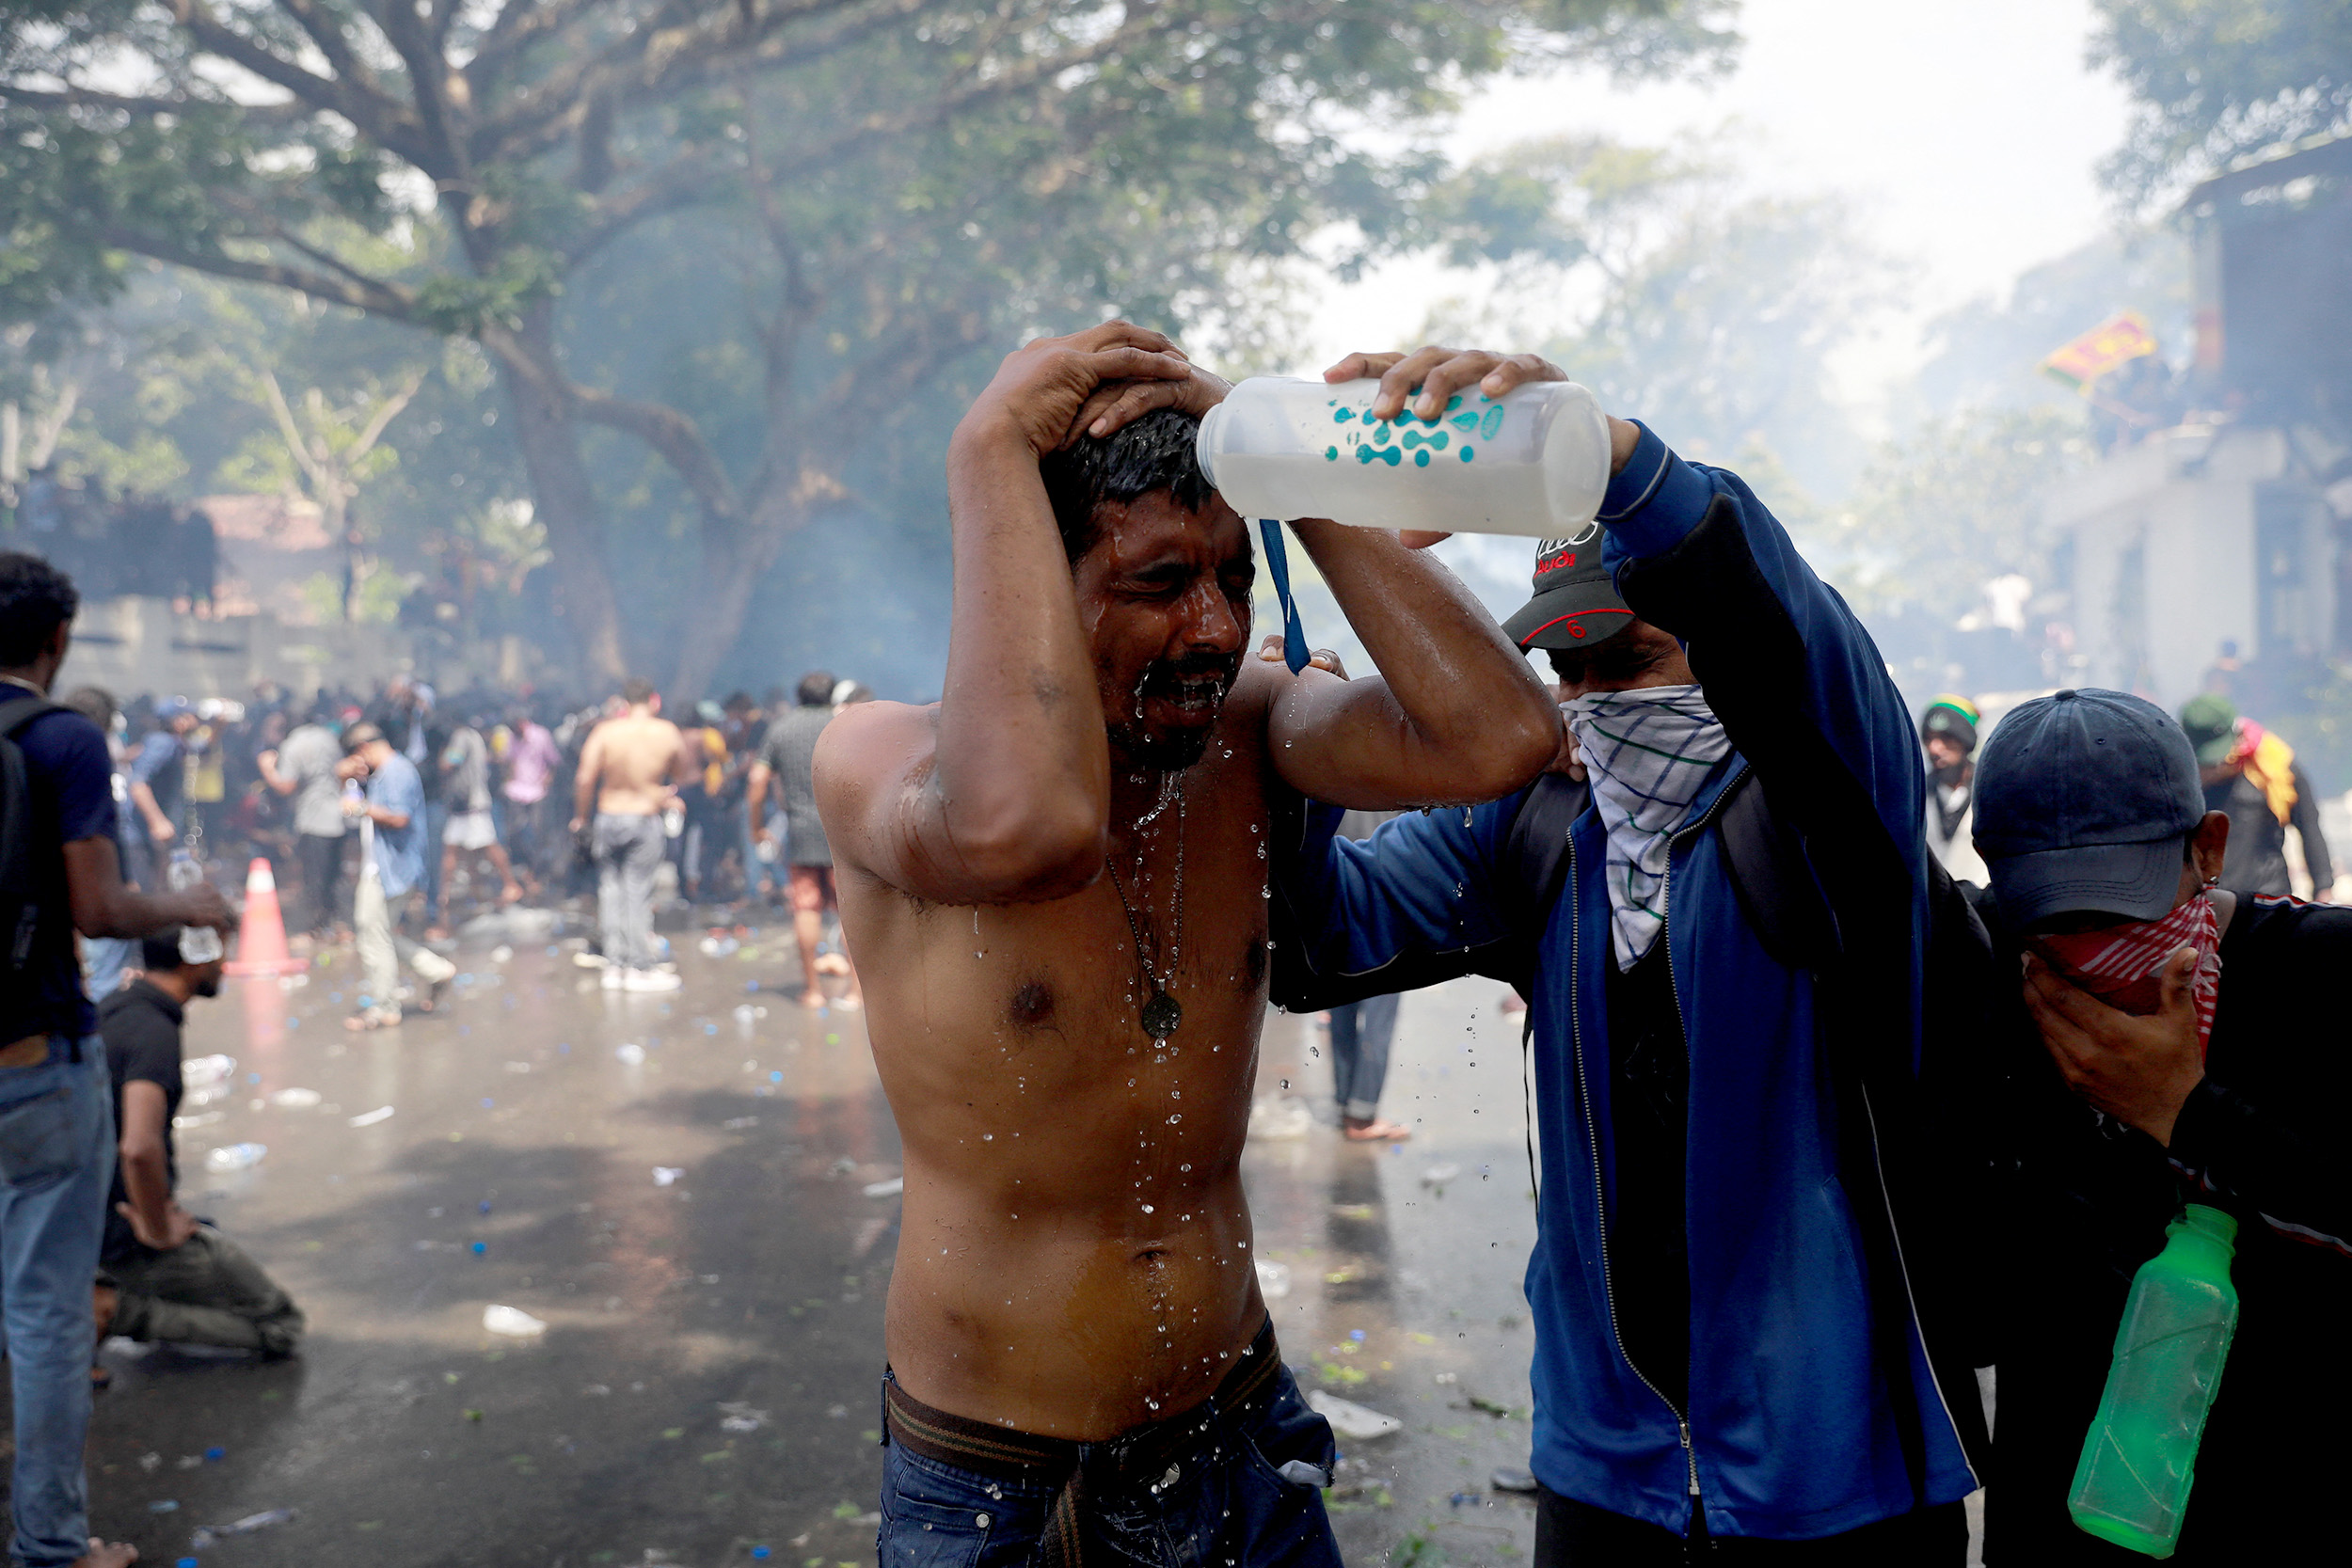 A demonstrator pours water on a man during a protest outside the office of Sri Lanka's Prime Minister Ranil Wickremesinghe in Colombo, Sri Lanka, on July 13.